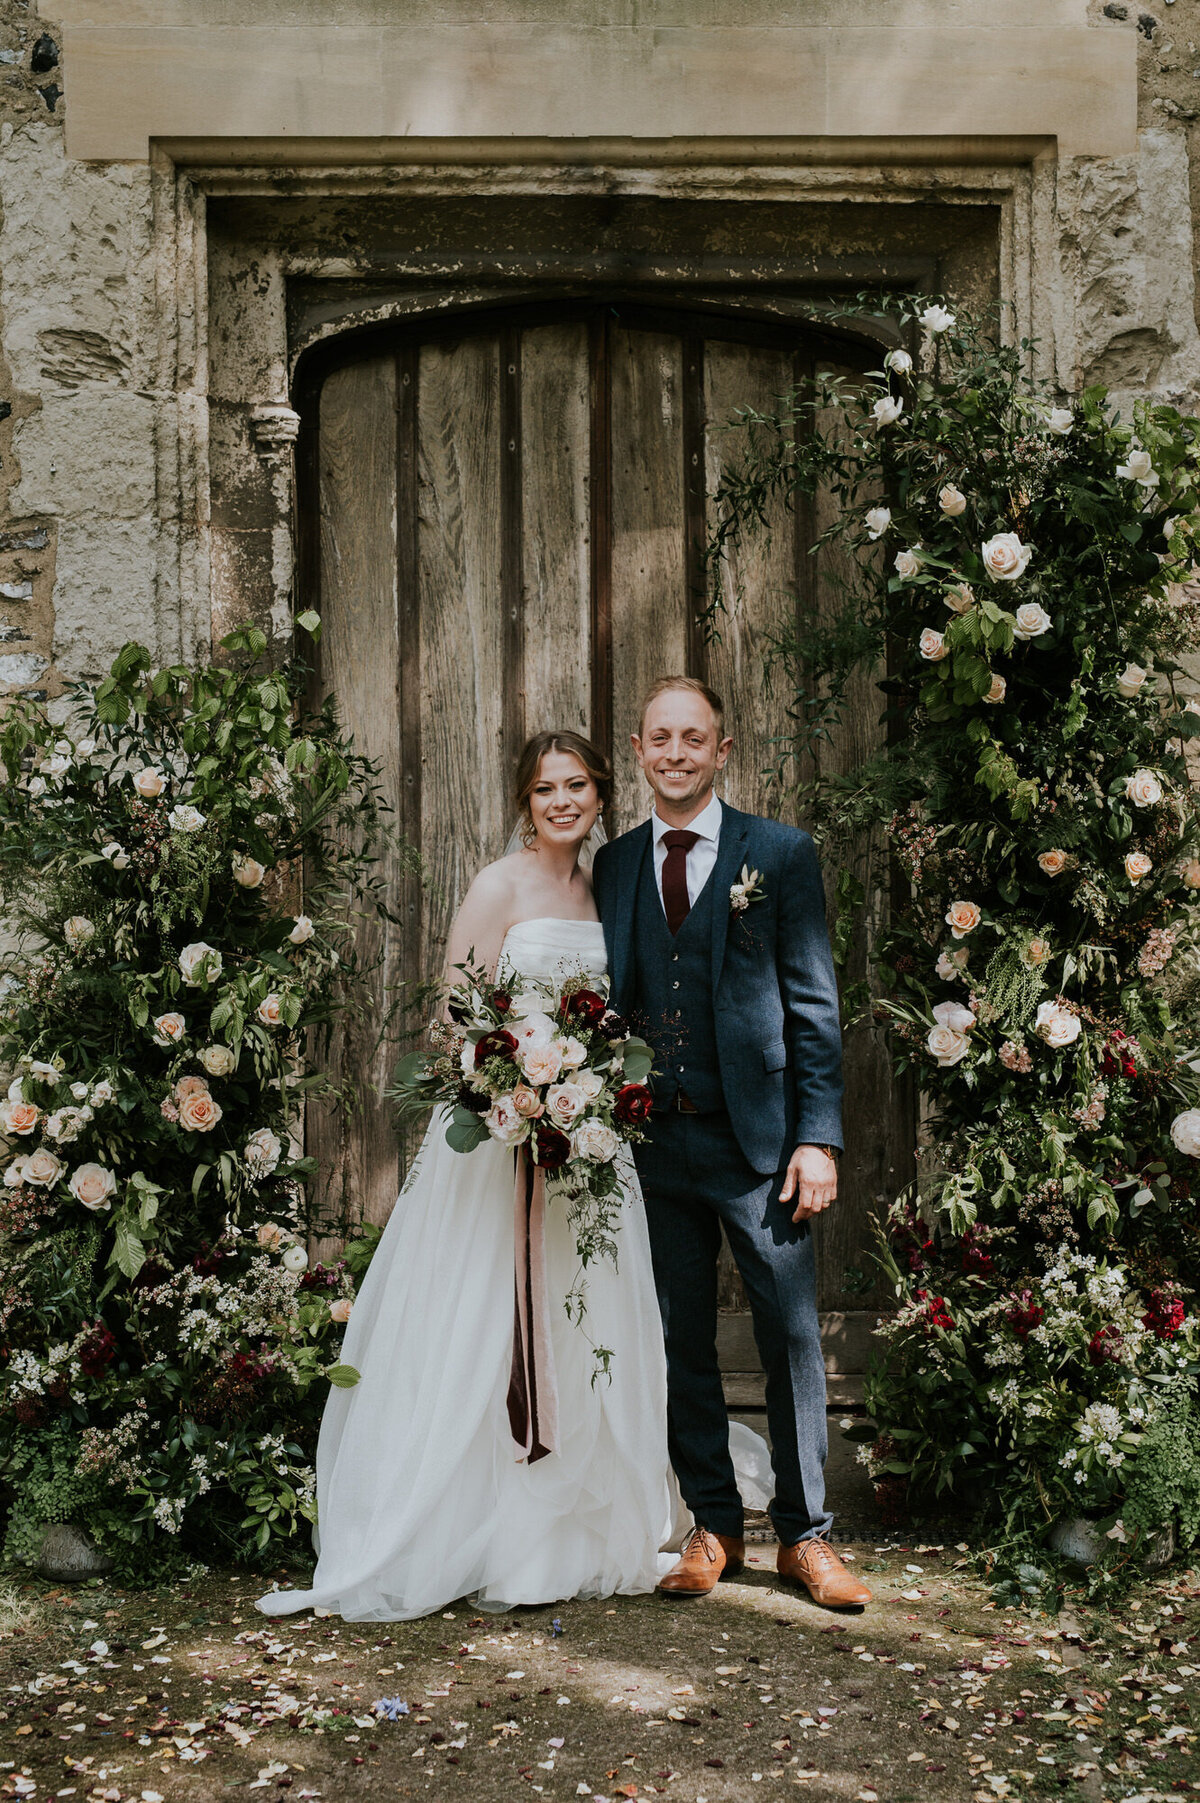 Bride and Groom posing in church doorway with flower arch